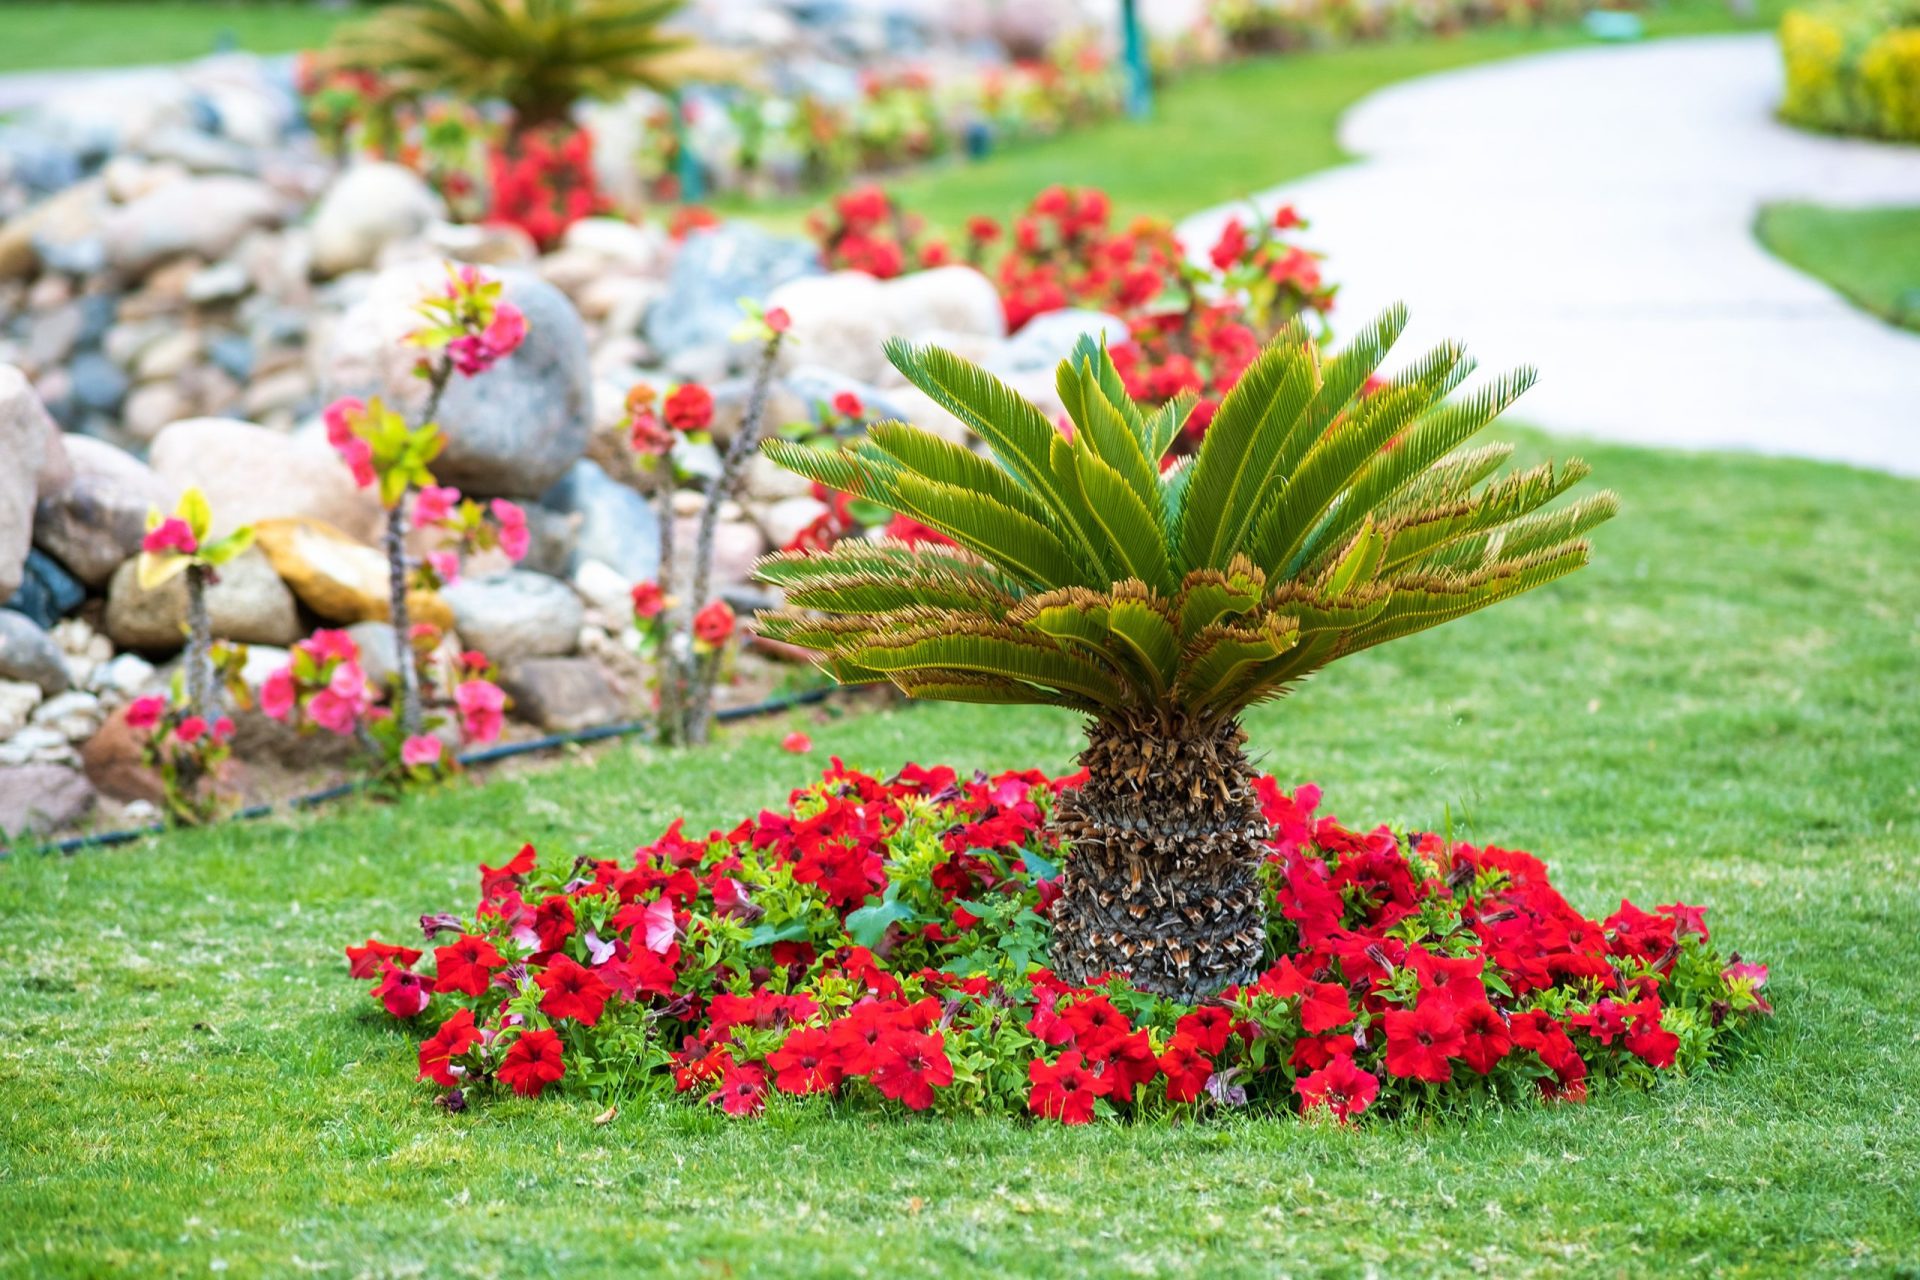 Stunning frontyard landscape in Sarasota featuring a small palm tree adorned with vibrant red flowers